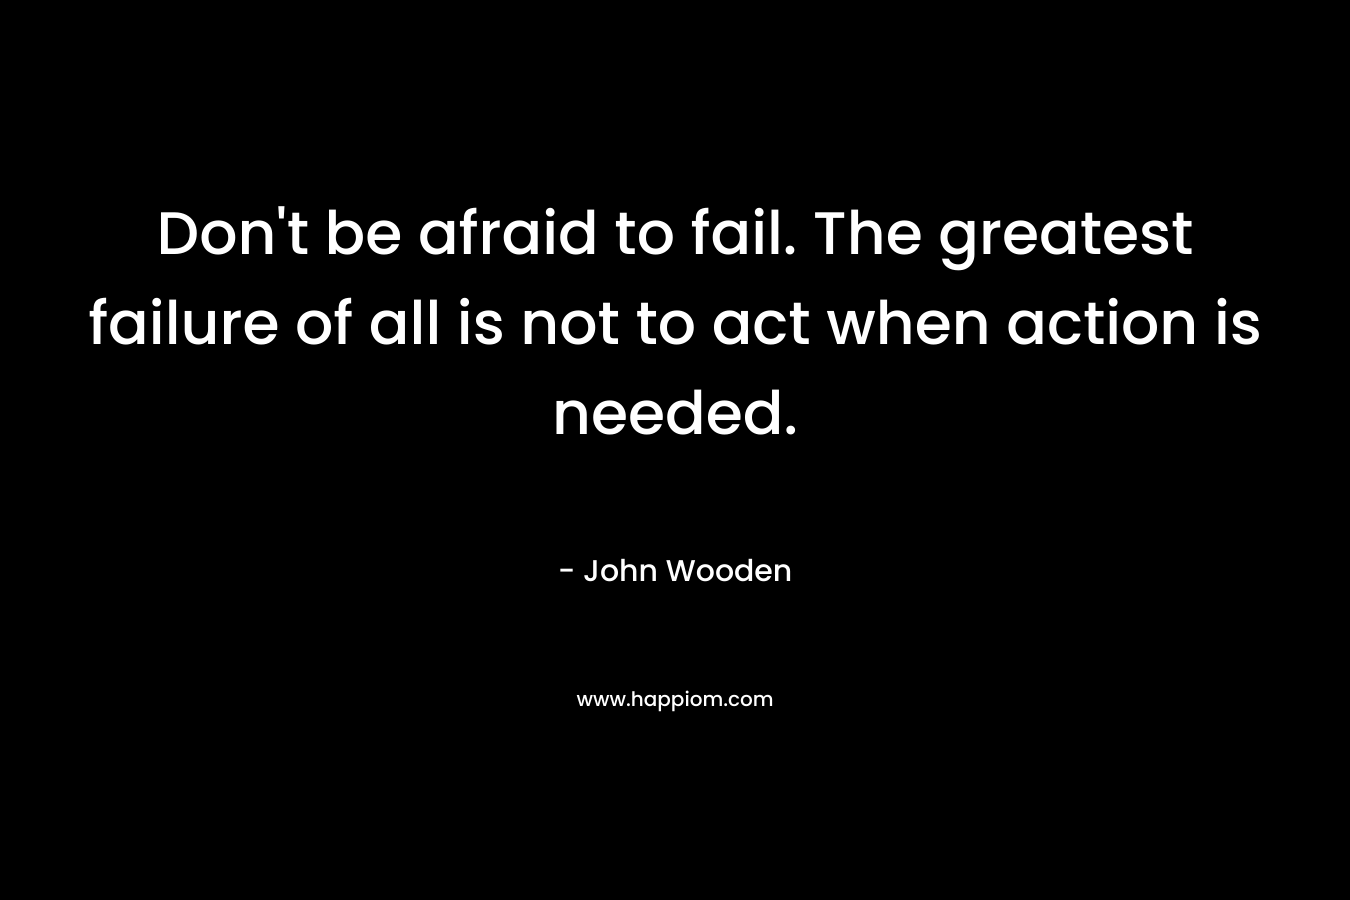 Don’t be afraid to fail. The greatest failure of all is not to act when action is needed. – John Wooden